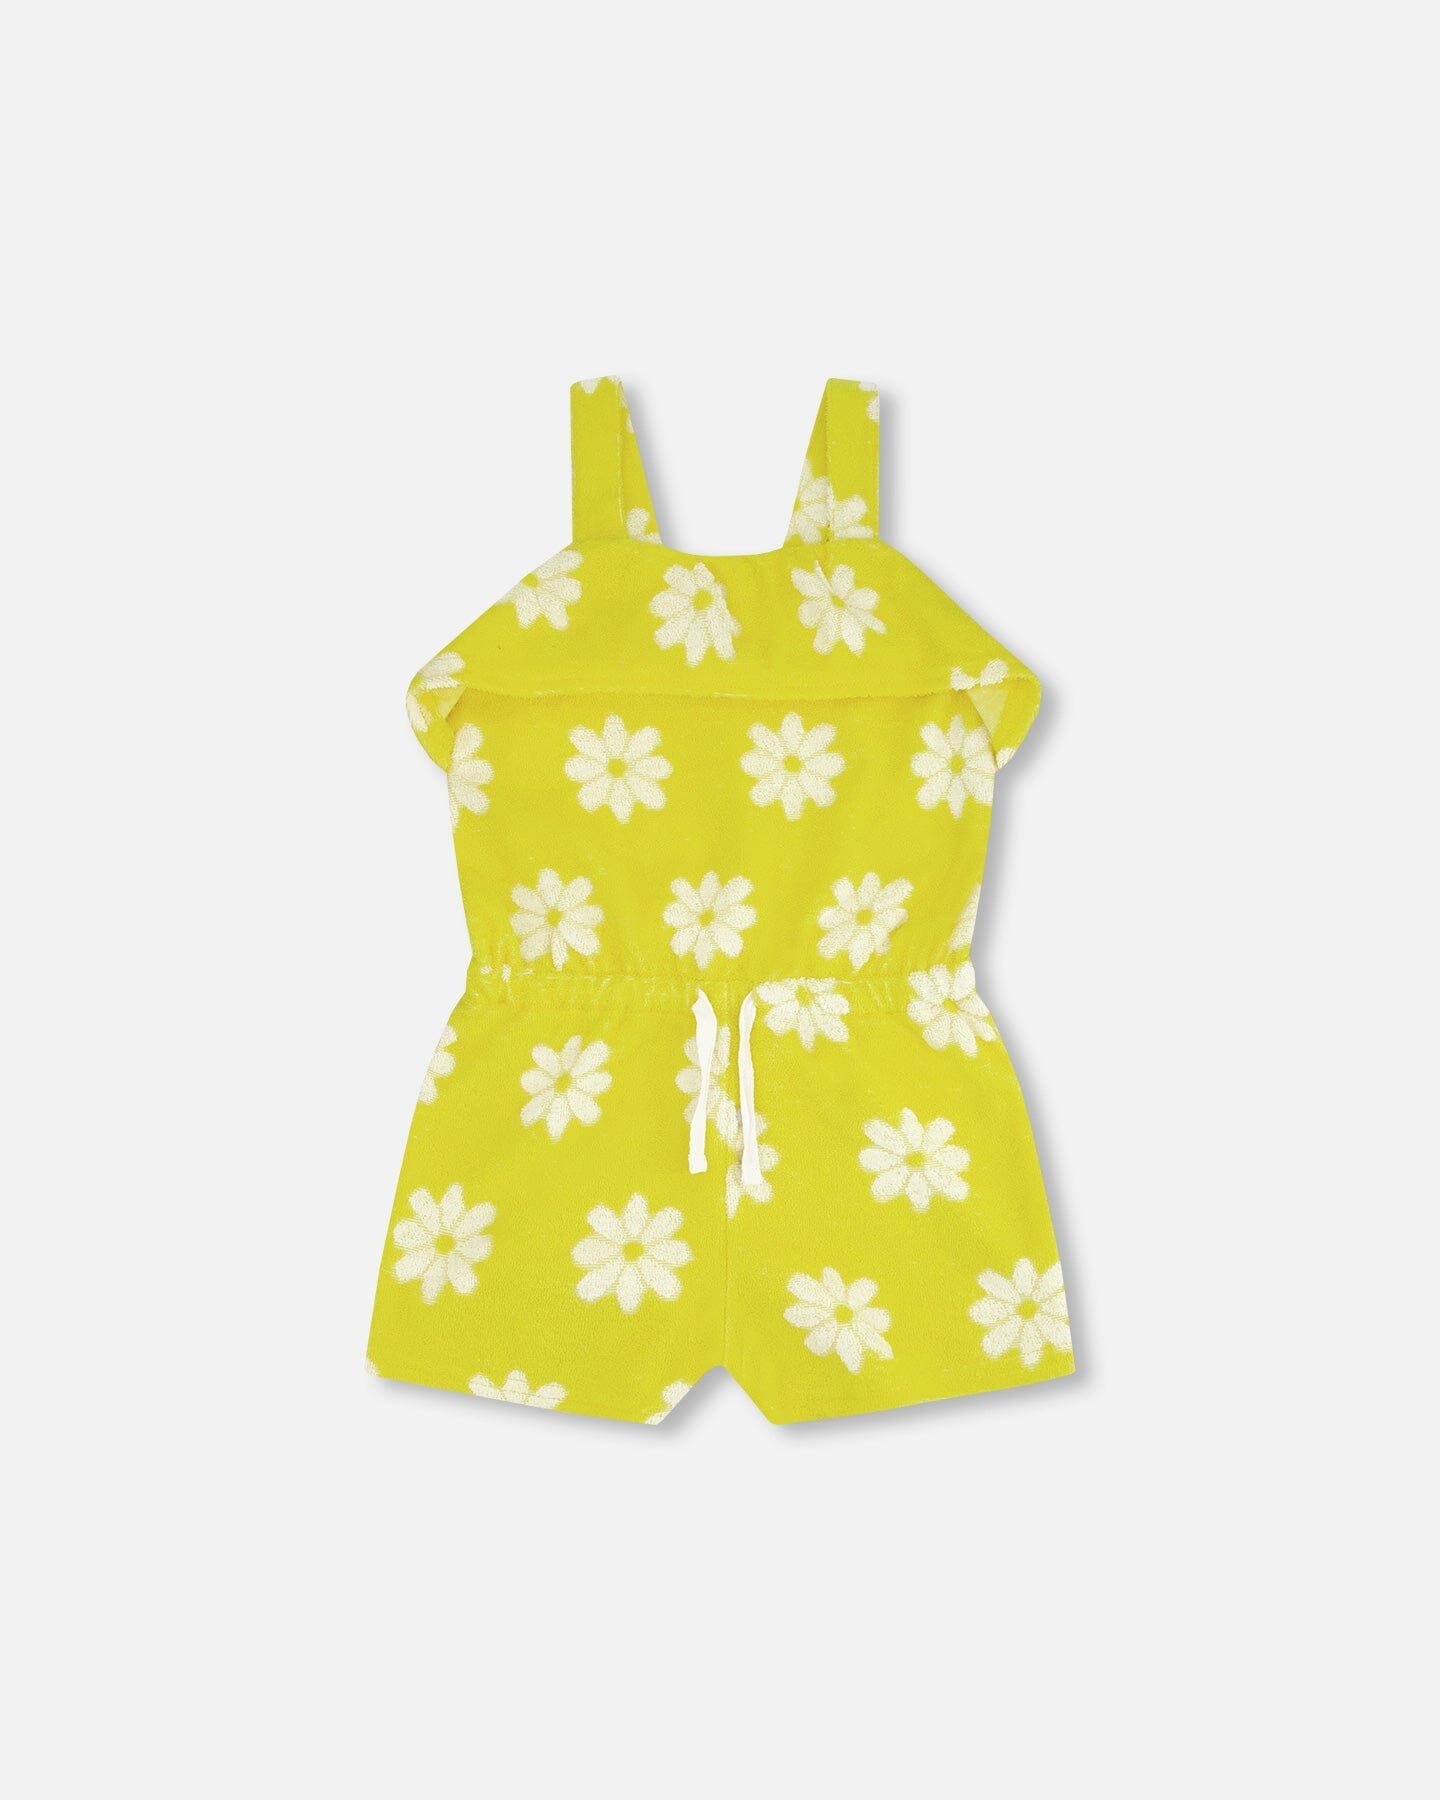 Terry Cloth Jumpsuit Yellow Printed Daisies - F30YG41_215